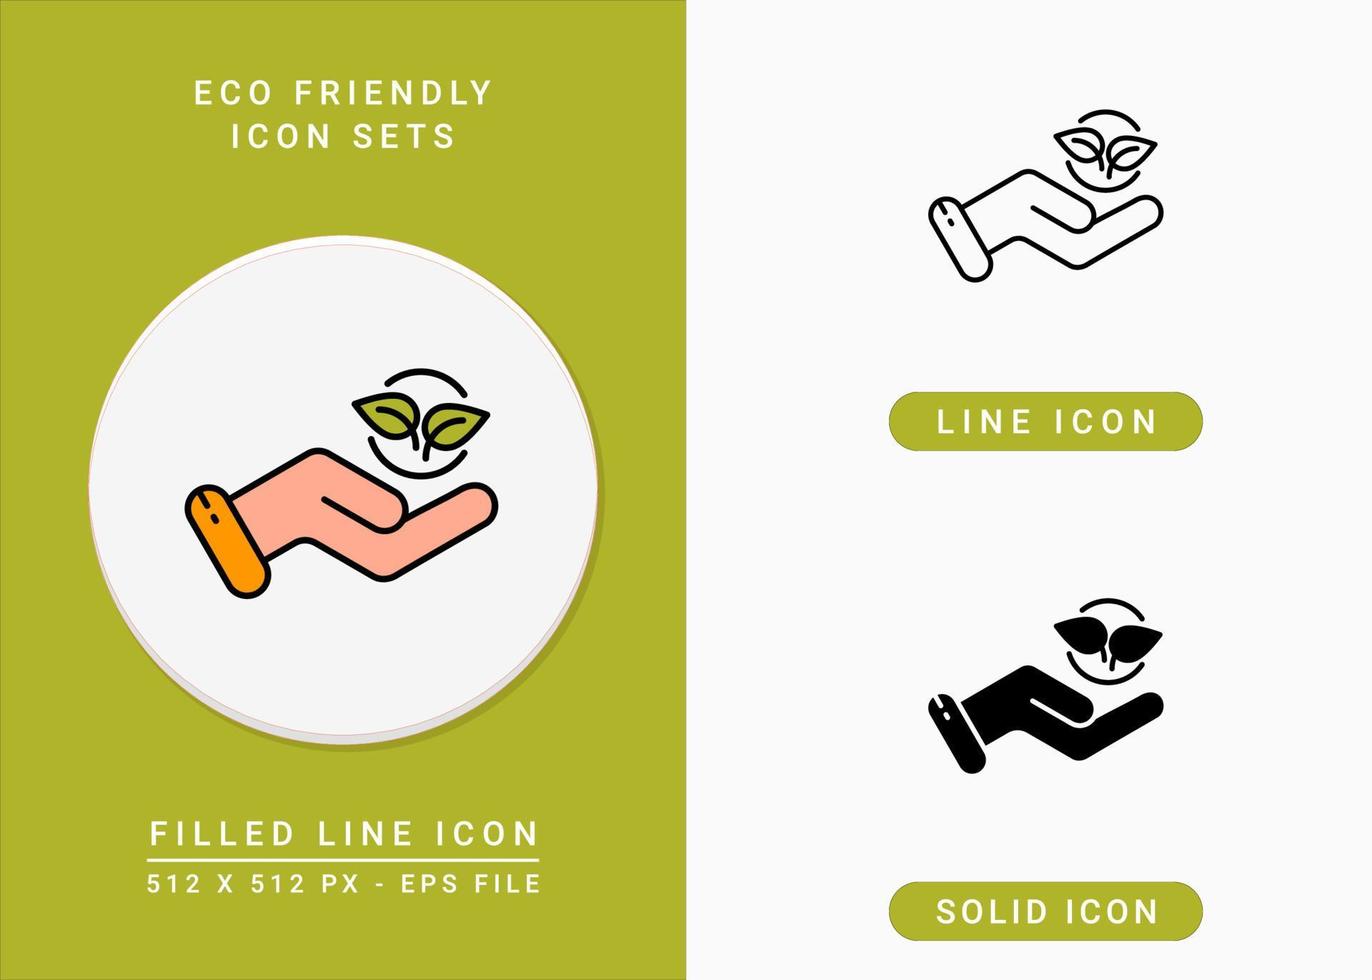 Eco friendly icons set vector illustration with solid icon line style. Bpa free biodegradable concept. Editable stroke icon on isolated background for web design, infographic and UI mobile app.